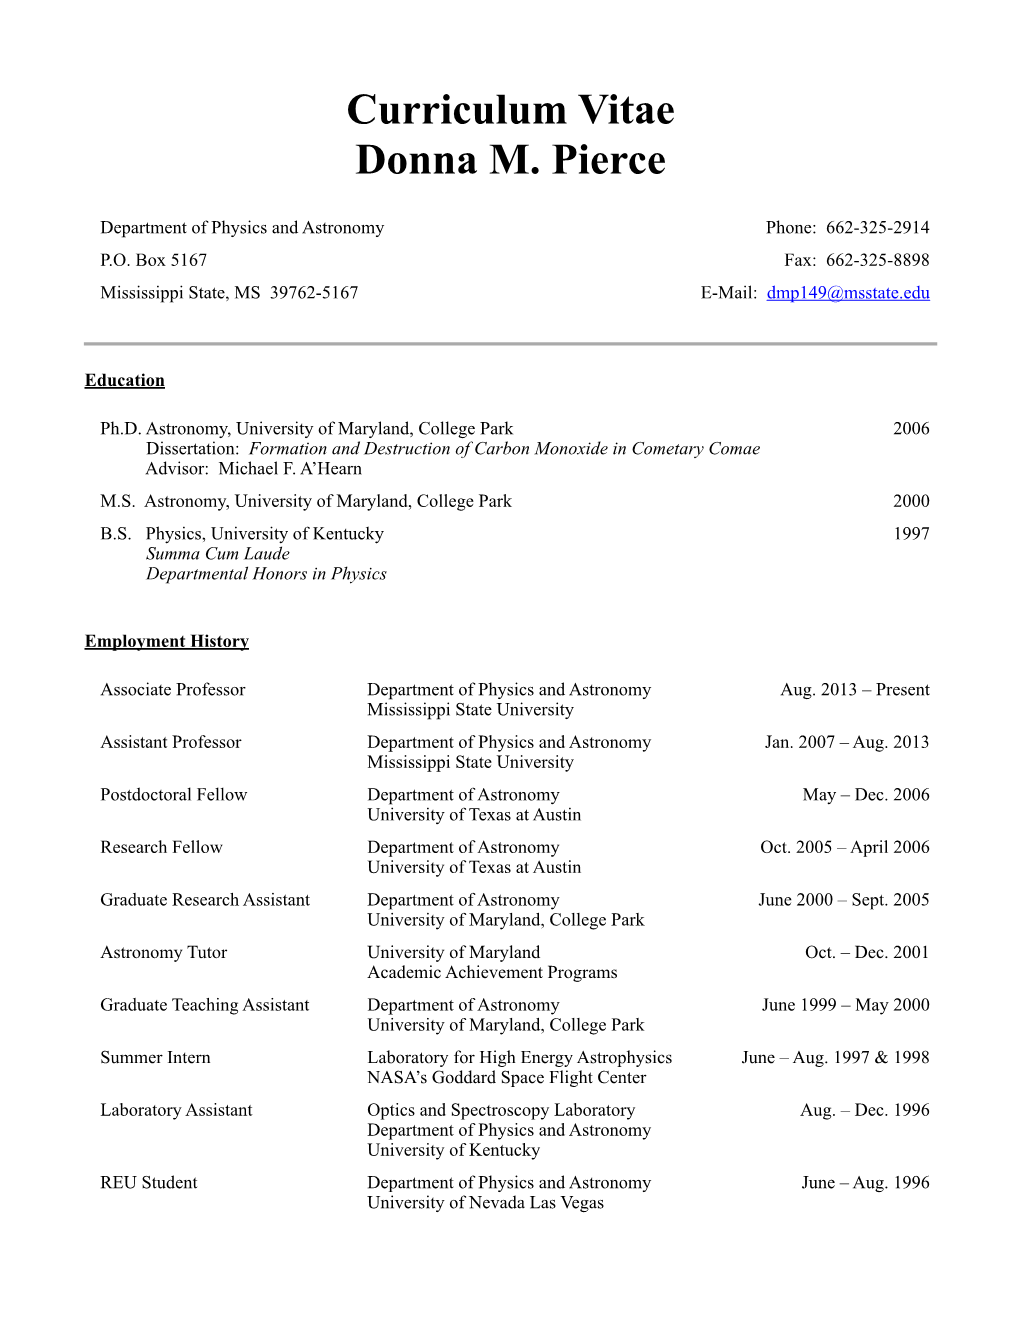 Curriculum Vitae Donna M. Pierce ! Department of Physics and Astronomy Phone: 662-325-2914 P.O